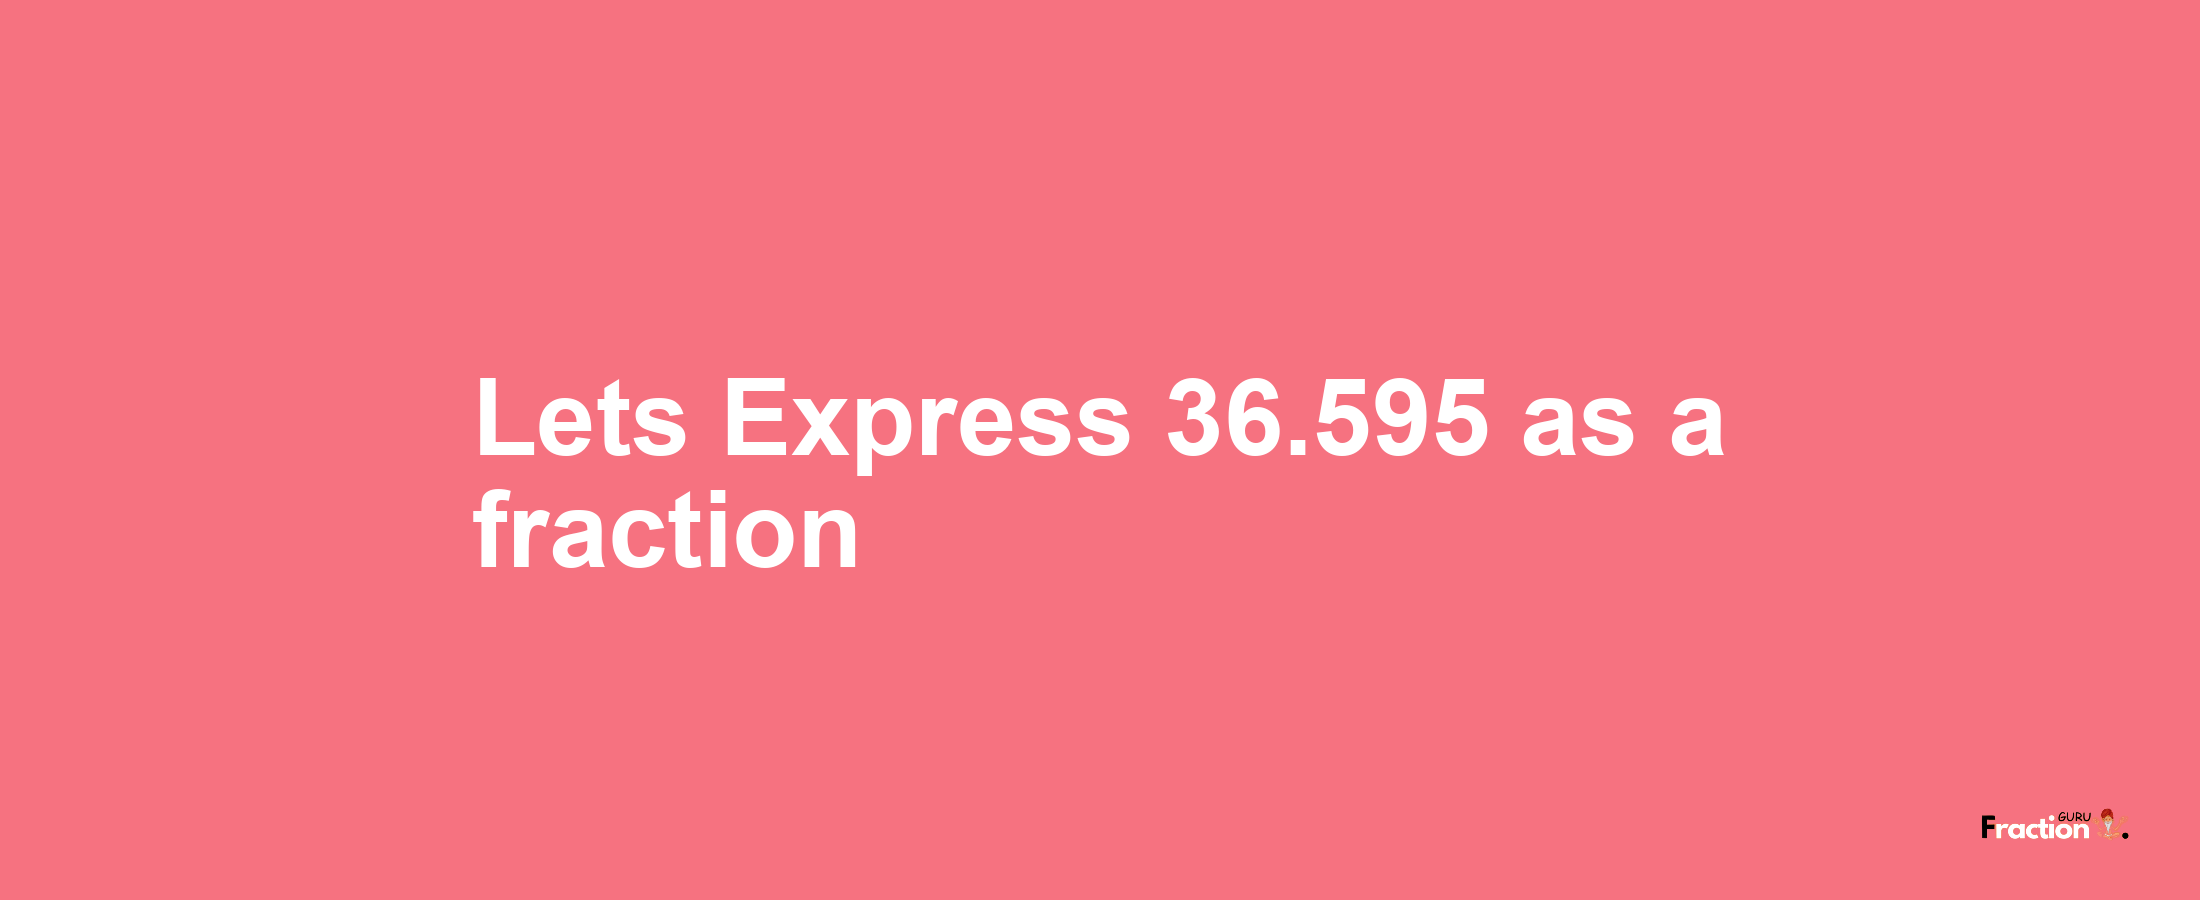 Lets Express 36.595 as afraction